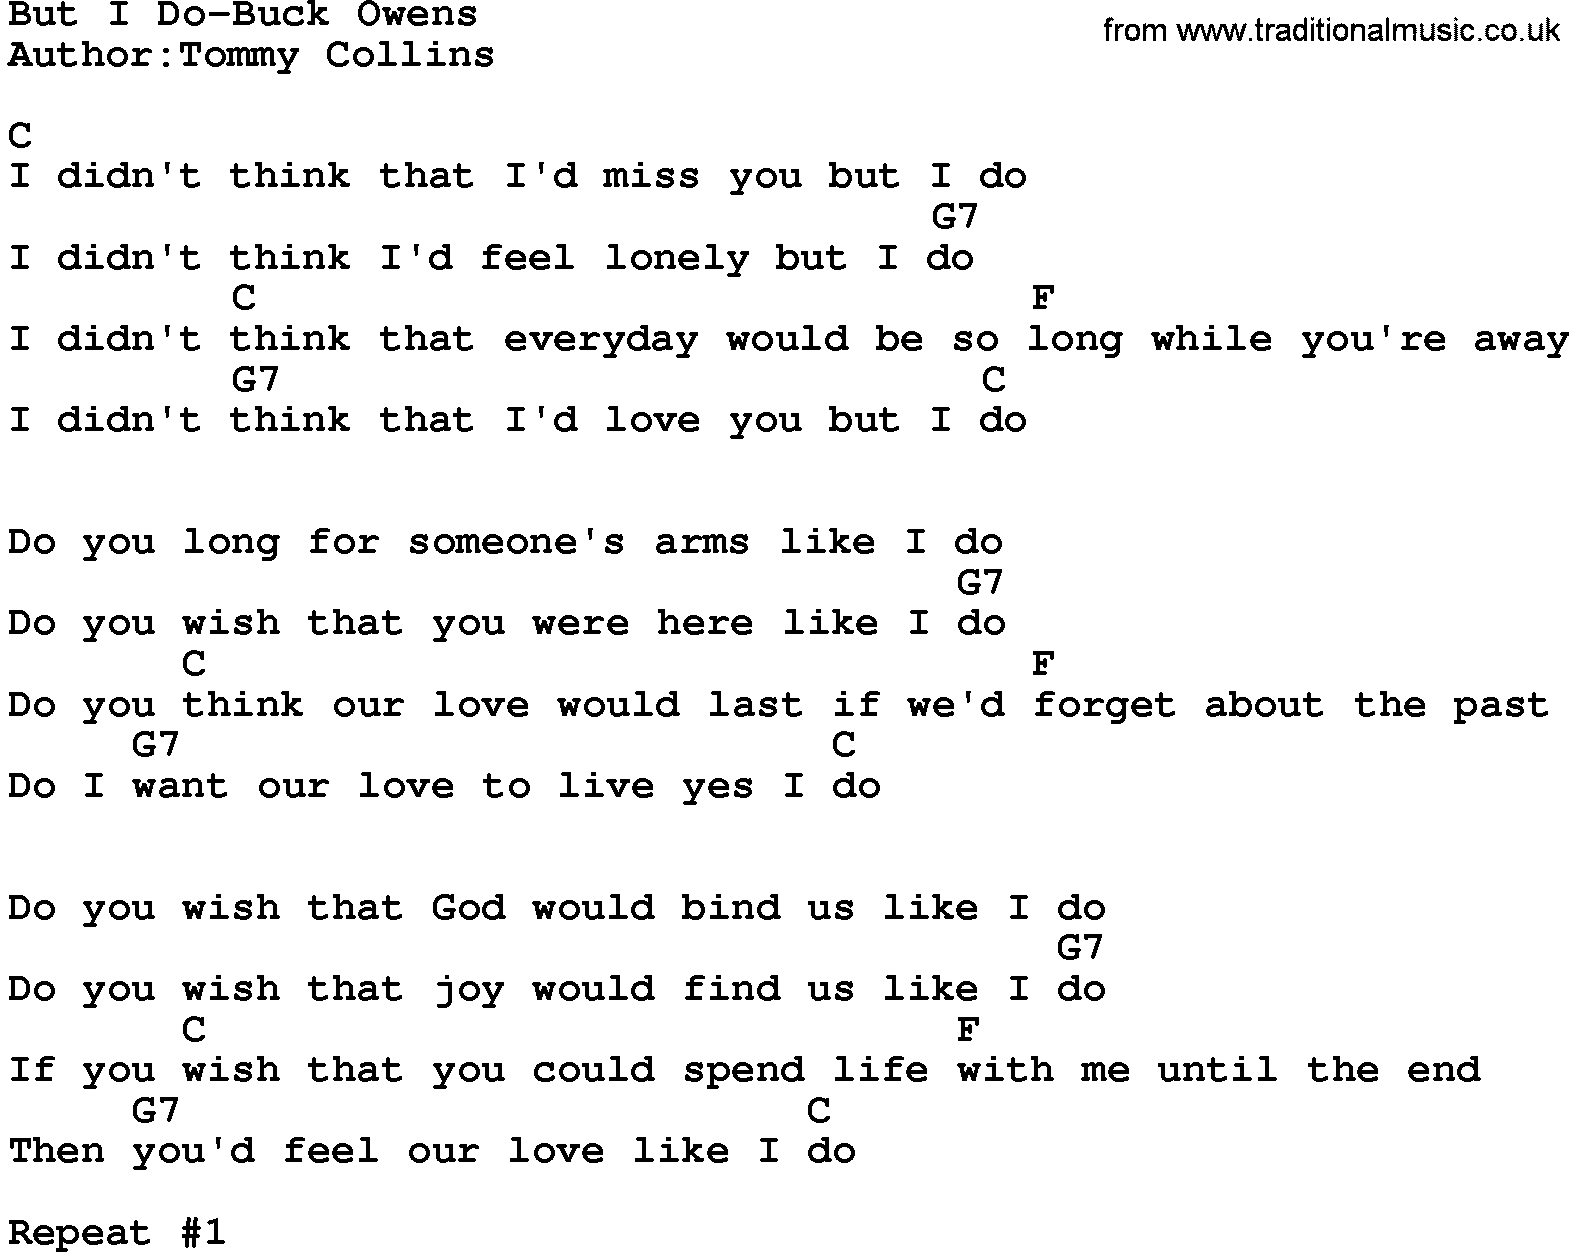 Country music song: But I Do-Buck Owens lyrics and chords